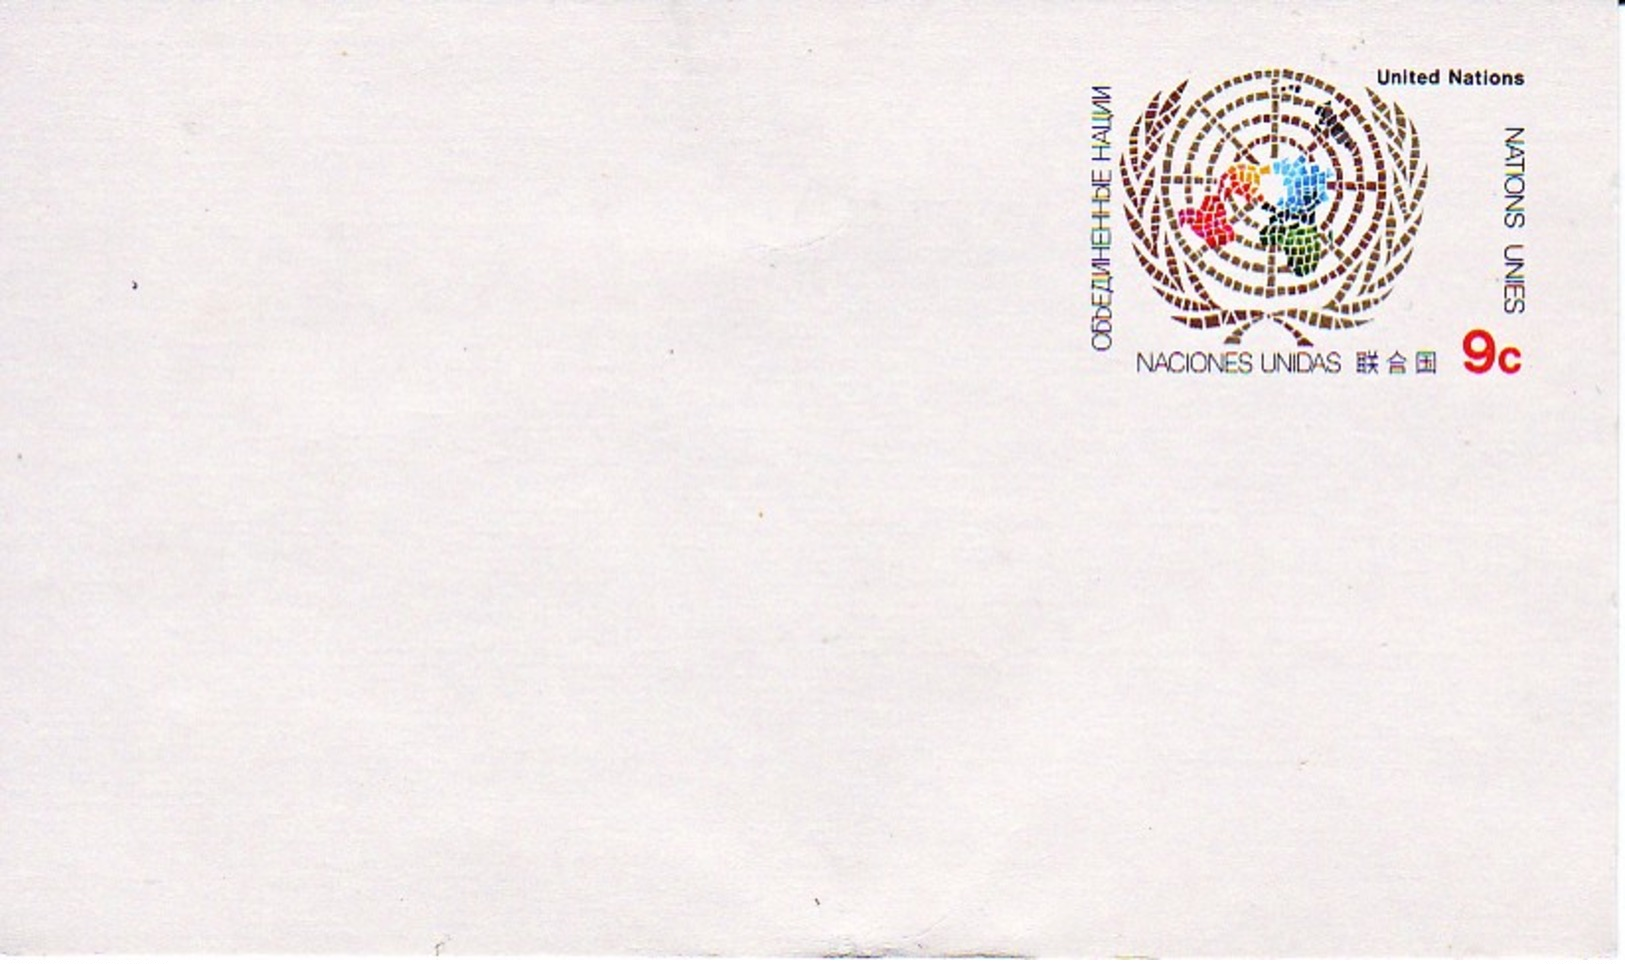 NATIONS-UNIES : Entier Postal Neuf - UNO